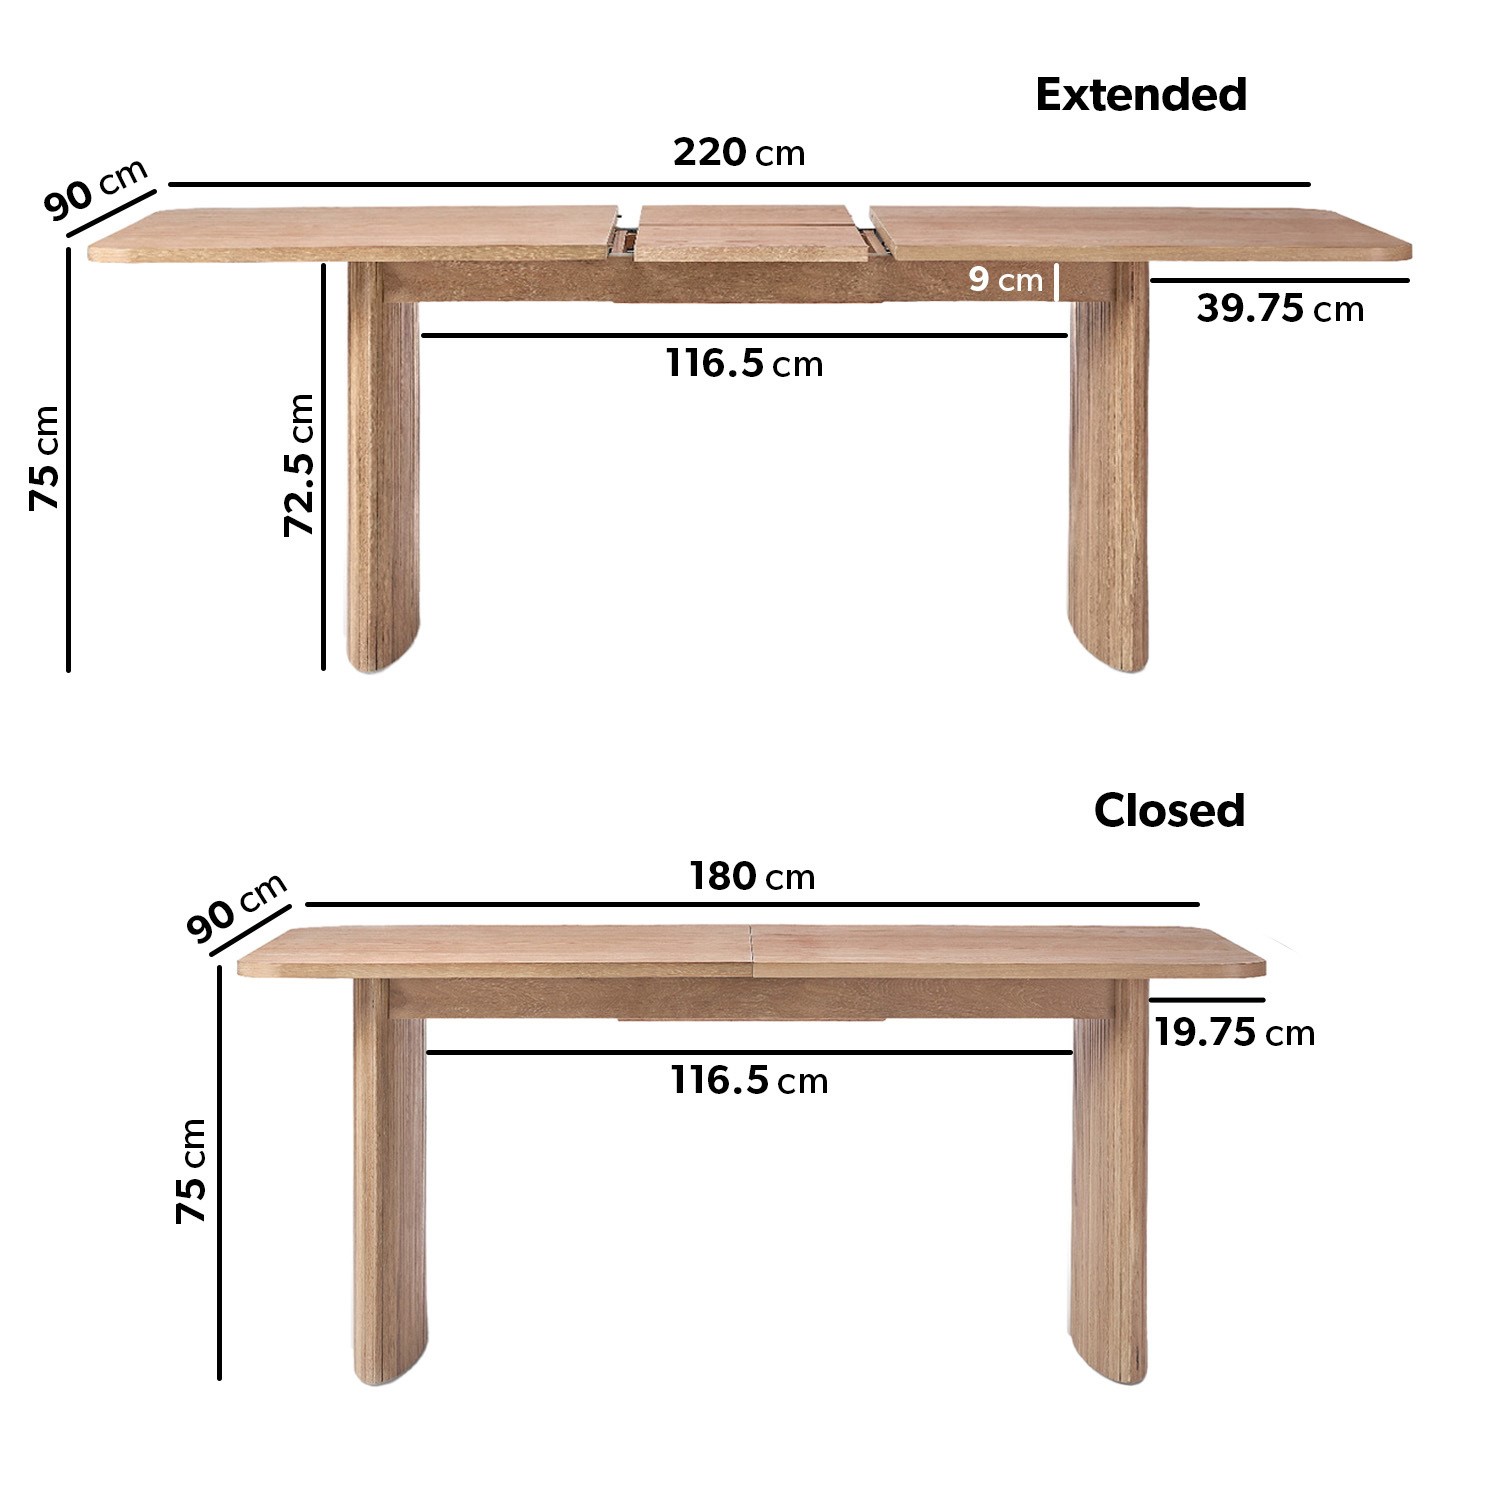 Read more about Large light oak extendable dining table seats 6-8 jarel